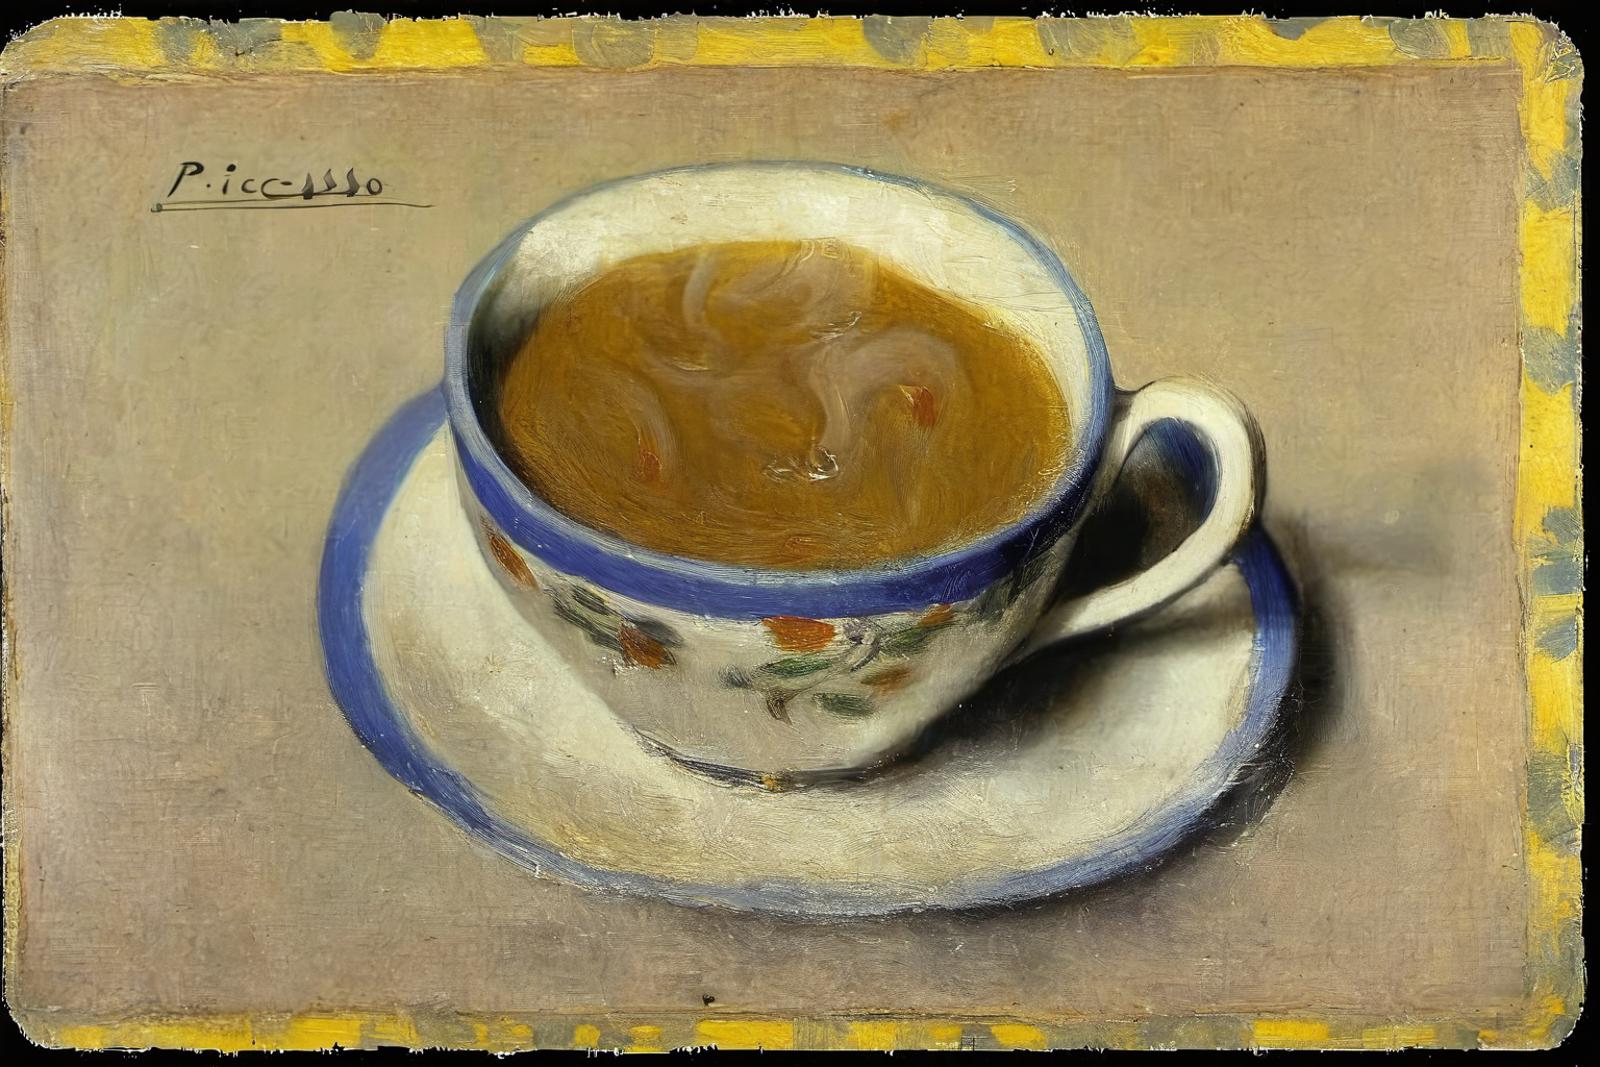 A cup of coffee painted on a blue and white plate.